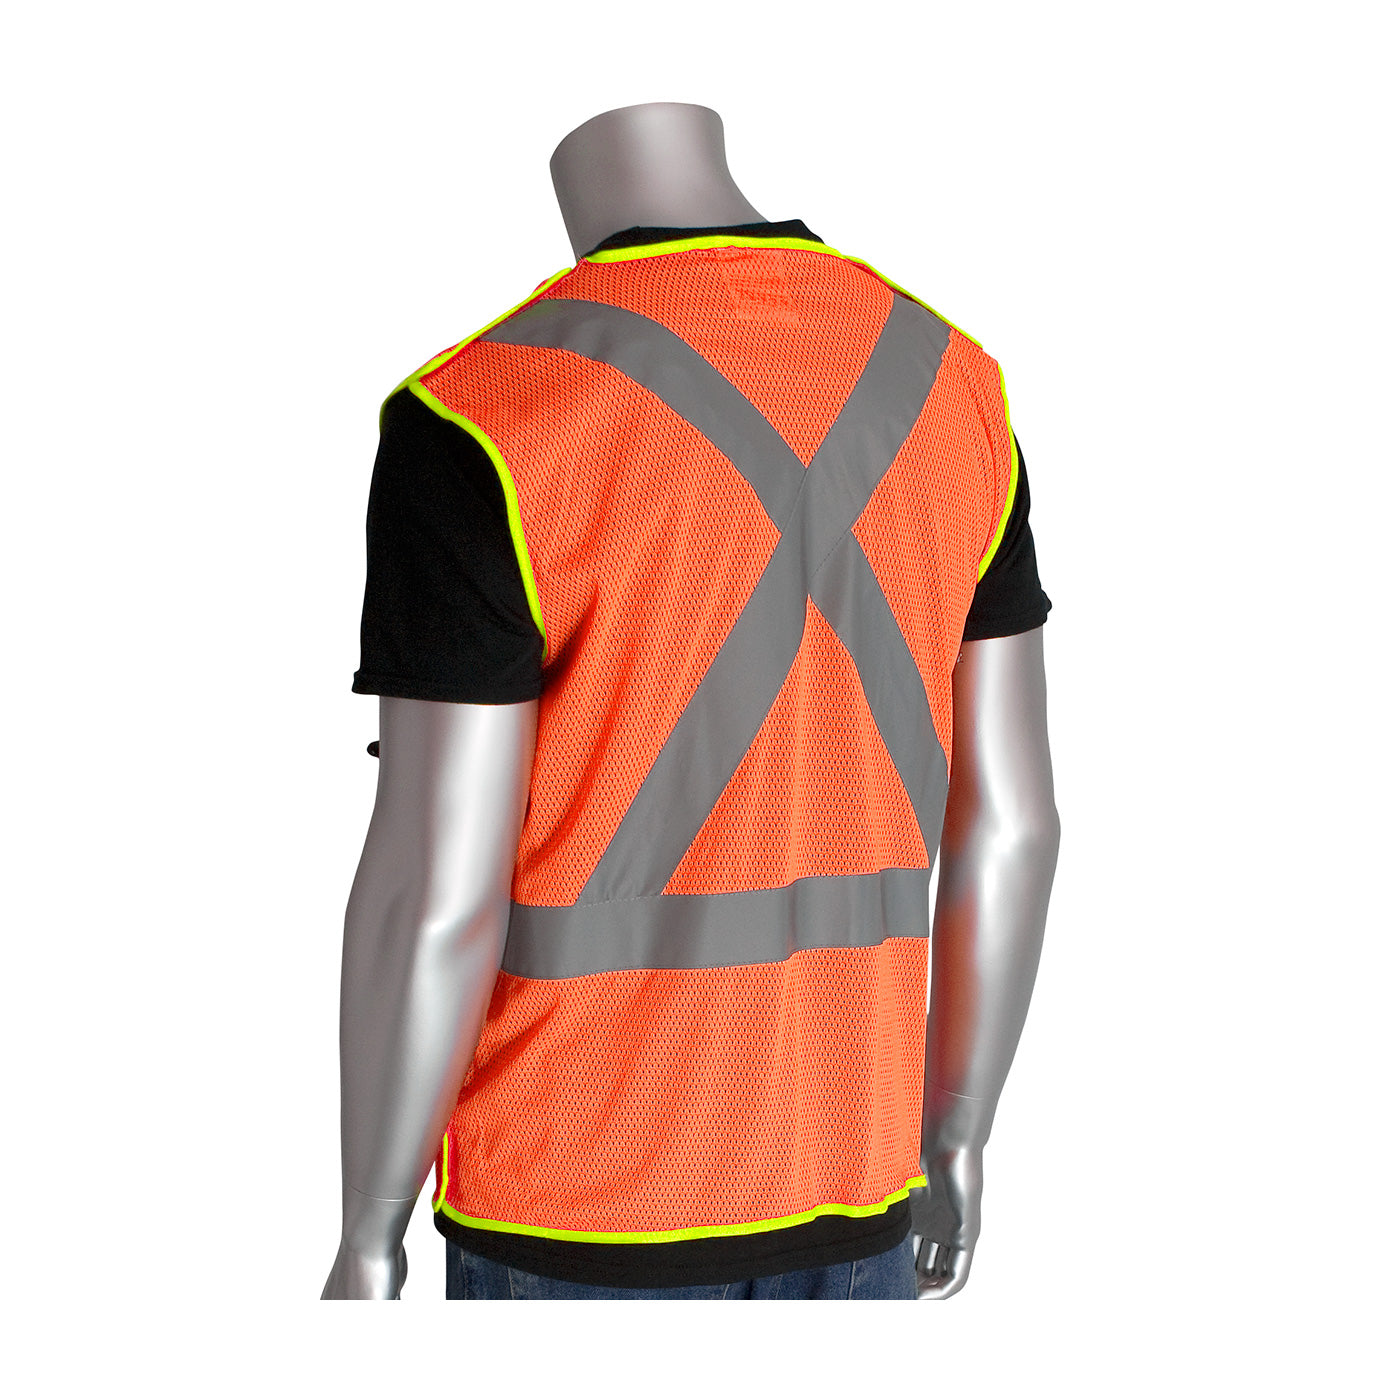 PIP-ANSI Type R Class 2 and CAN/CSA Z96 X-Back Breakaway Mesh Vest-eSafety Supplies, Inc